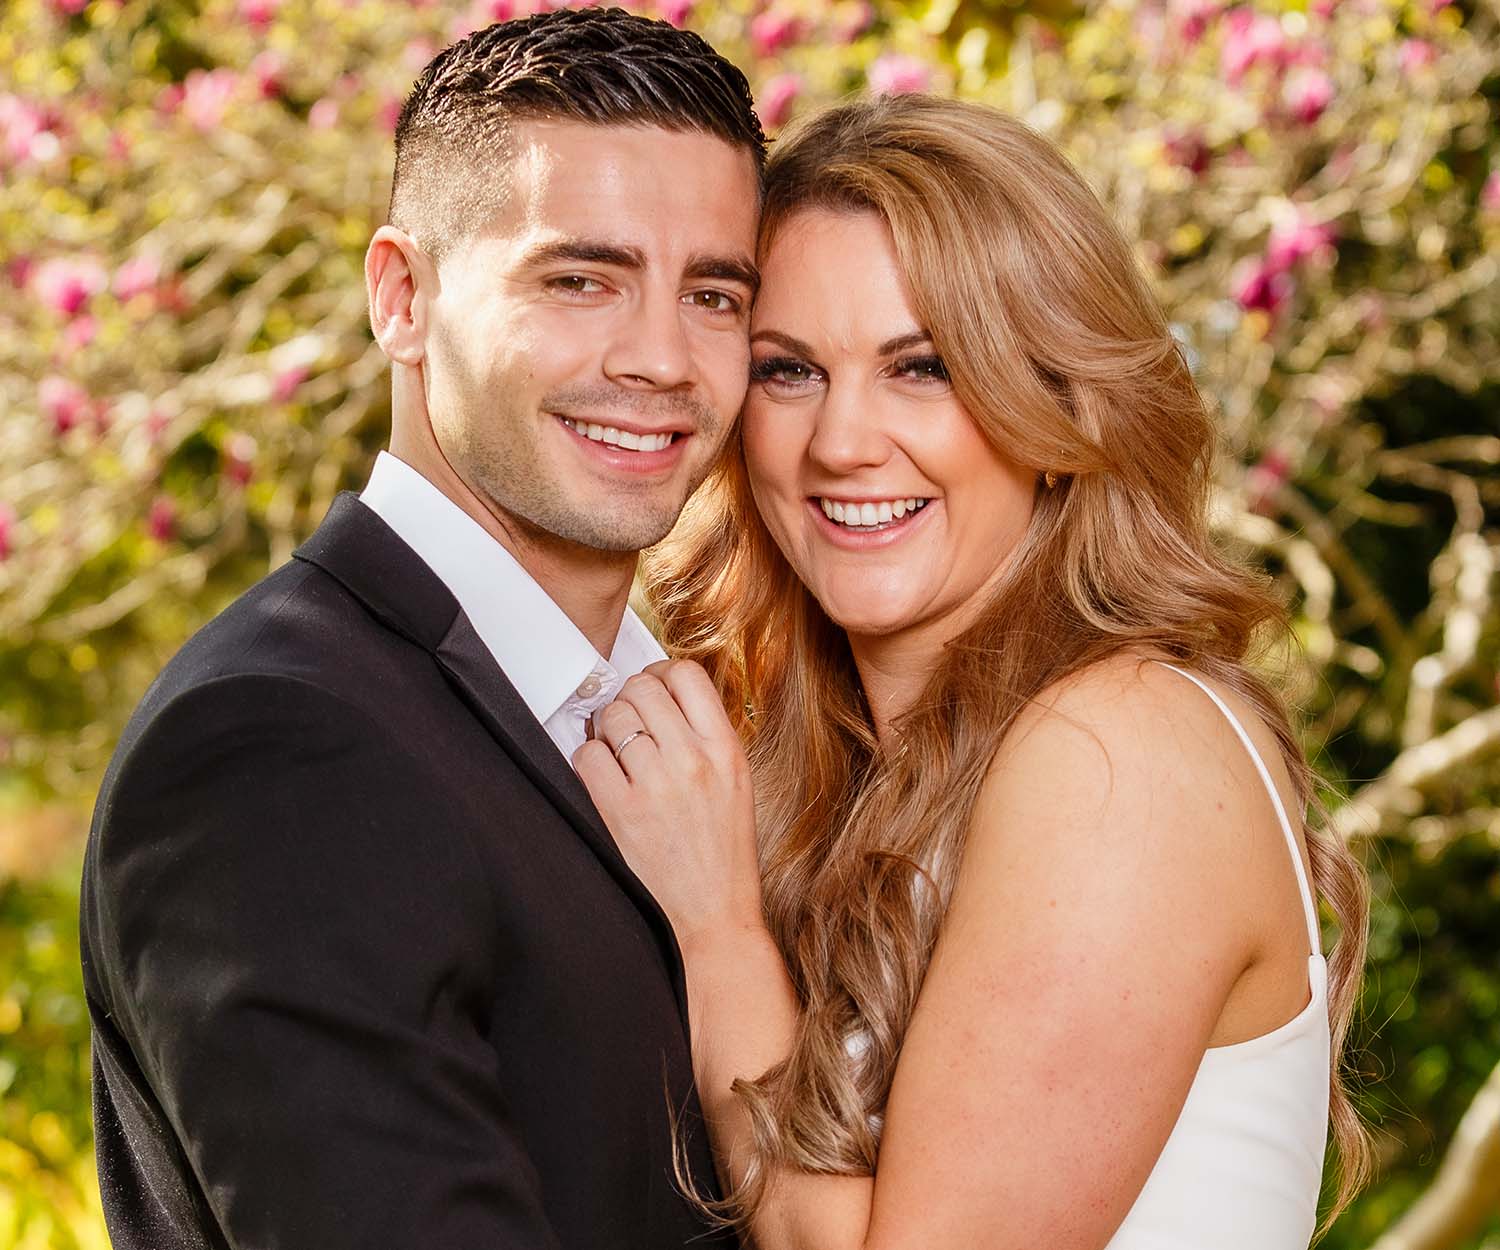 Anna Saxton and Jordan Dare Married At First Sight NZ